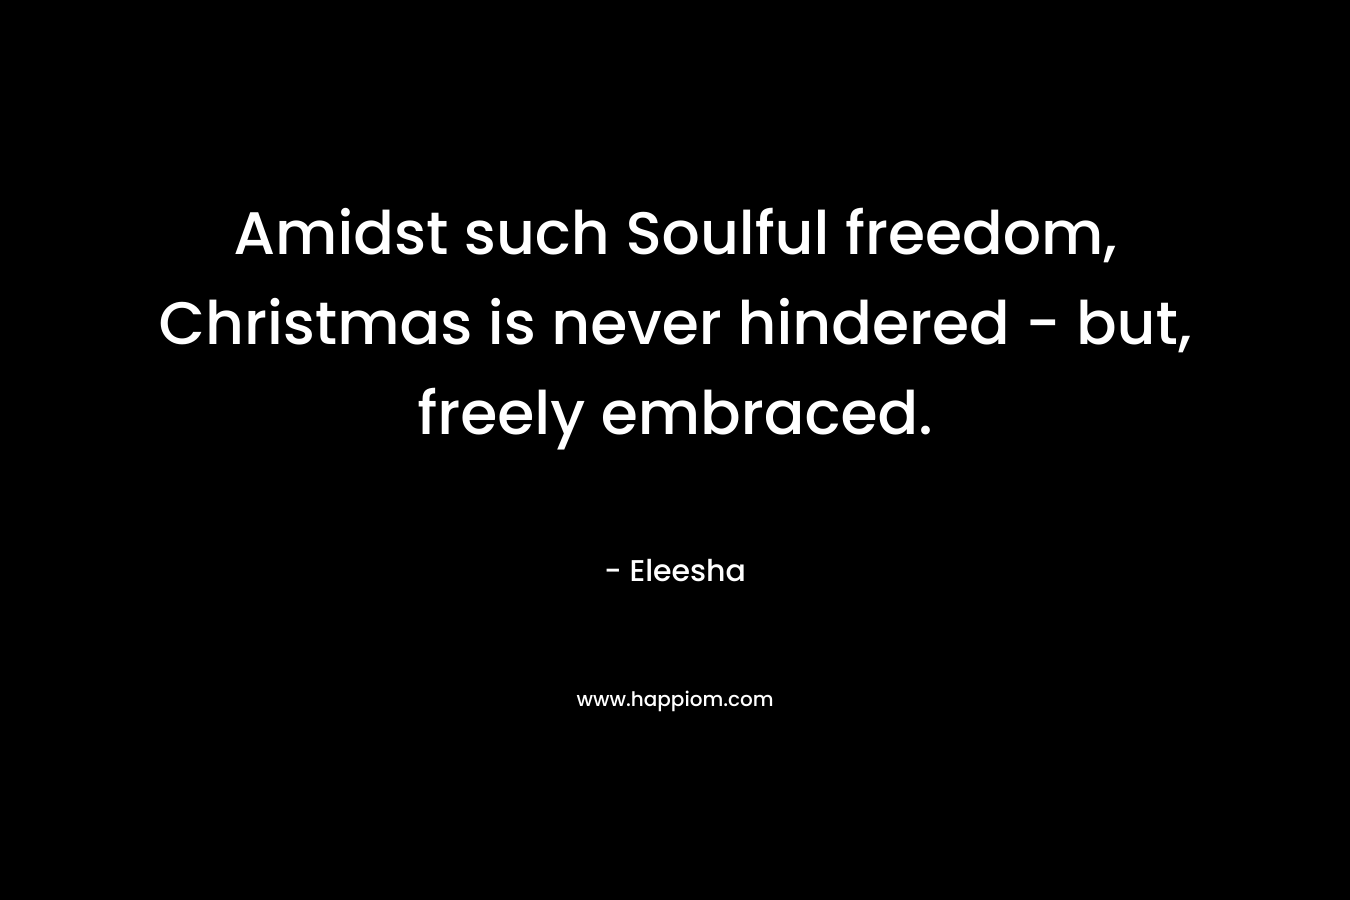 Amidst such Soulful freedom, Christmas is never hindered - but, freely embraced.